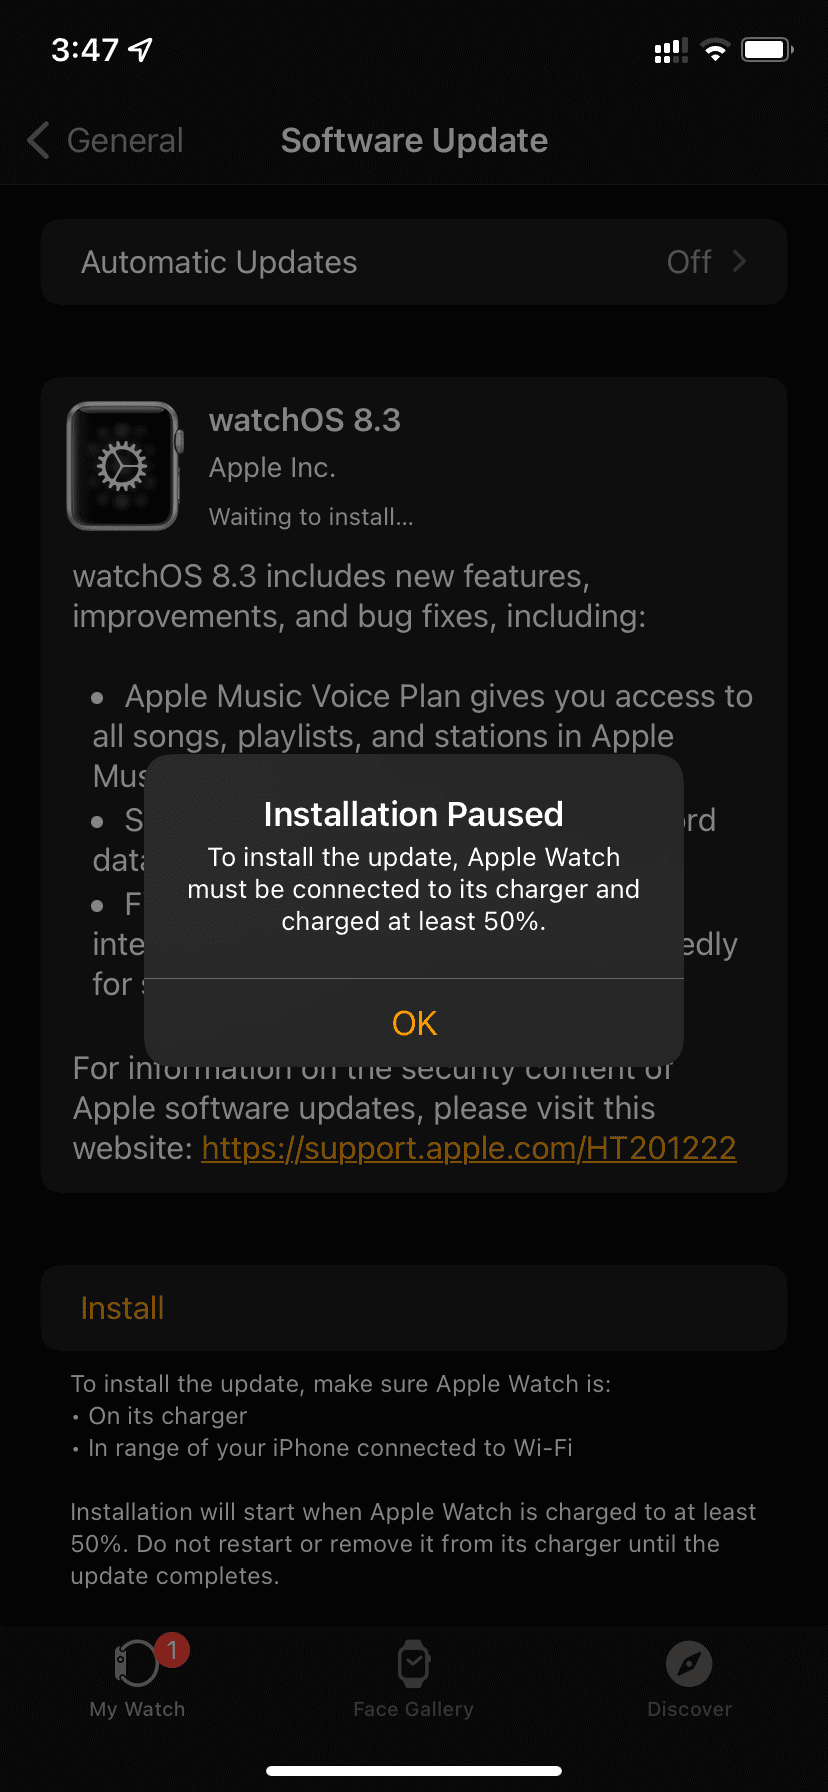 Installation Paused on Apple Watch